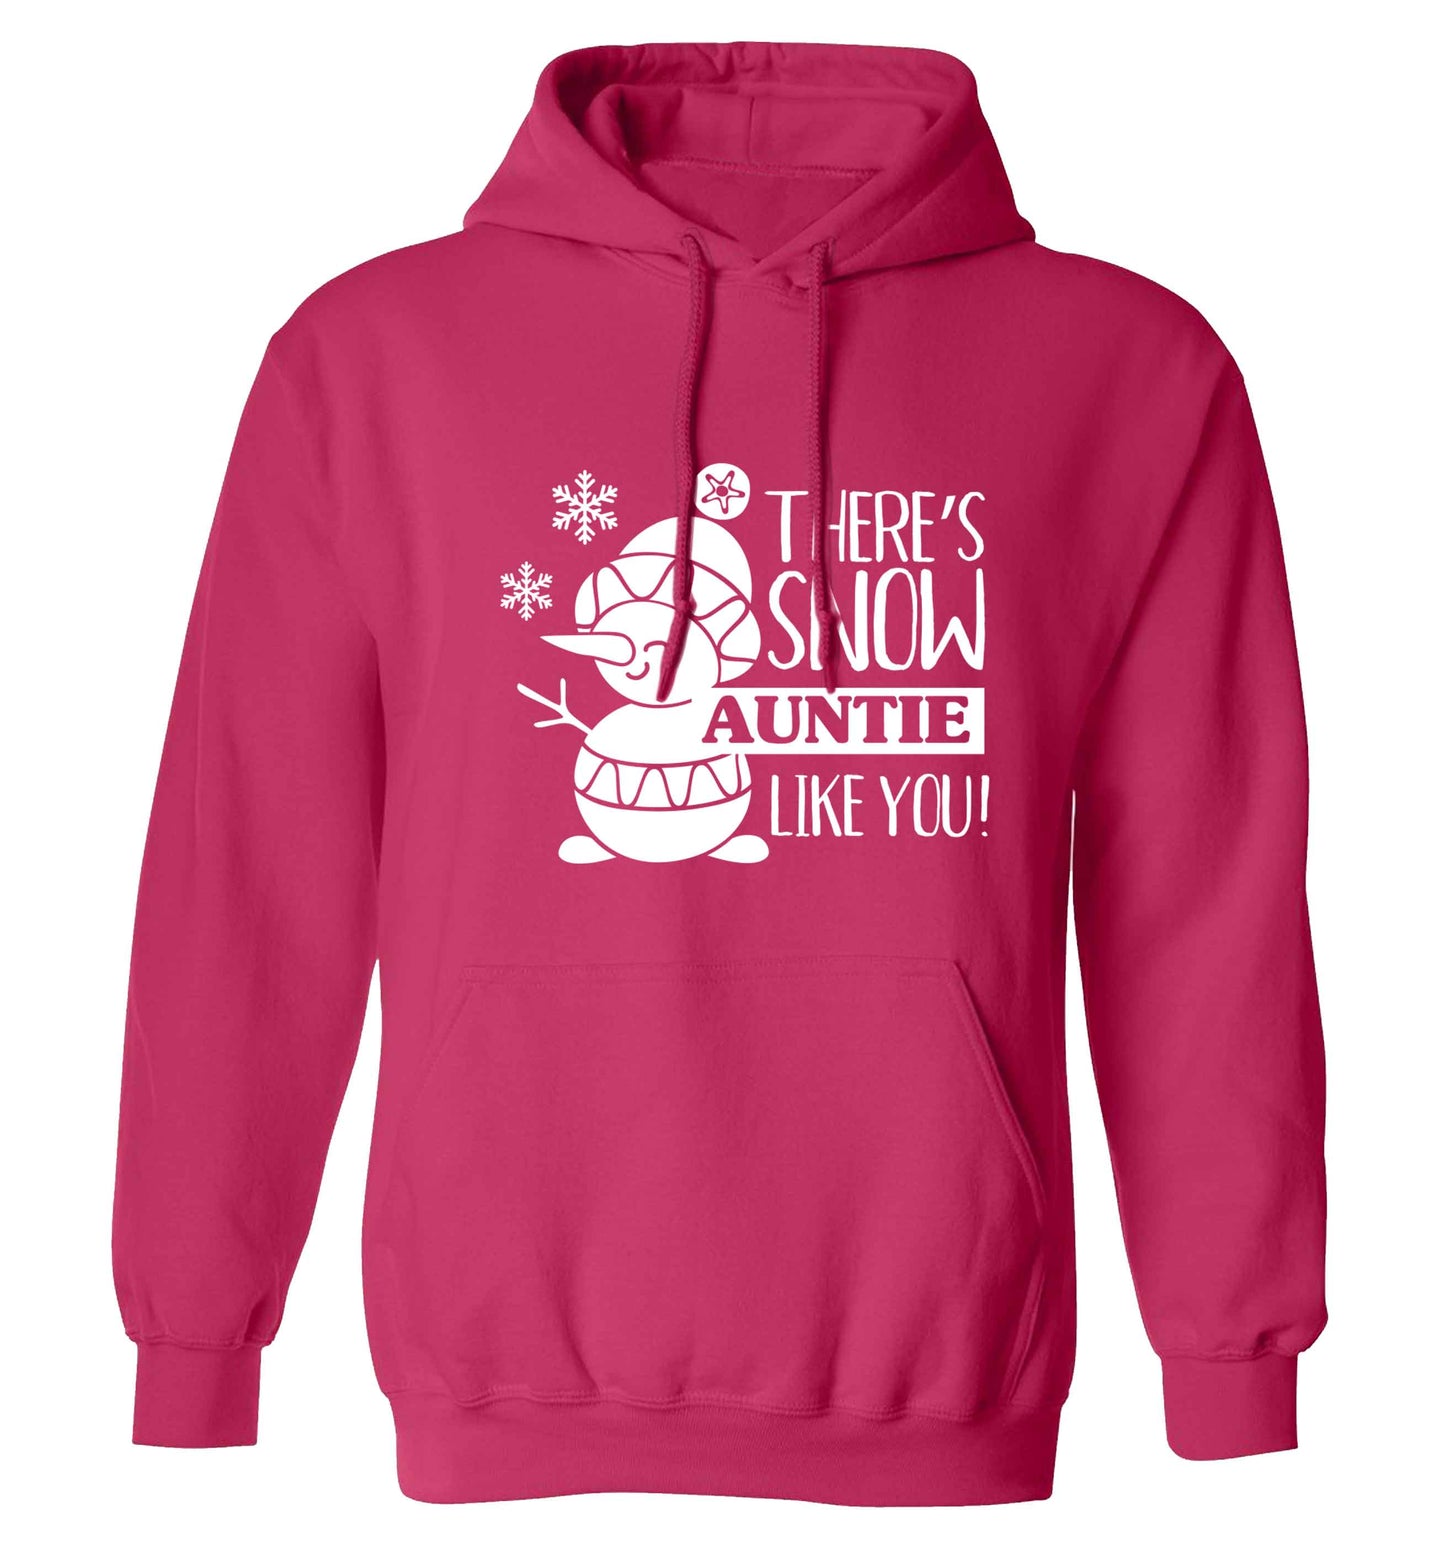 There's snow auntie like you adults unisex pink hoodie 2XL